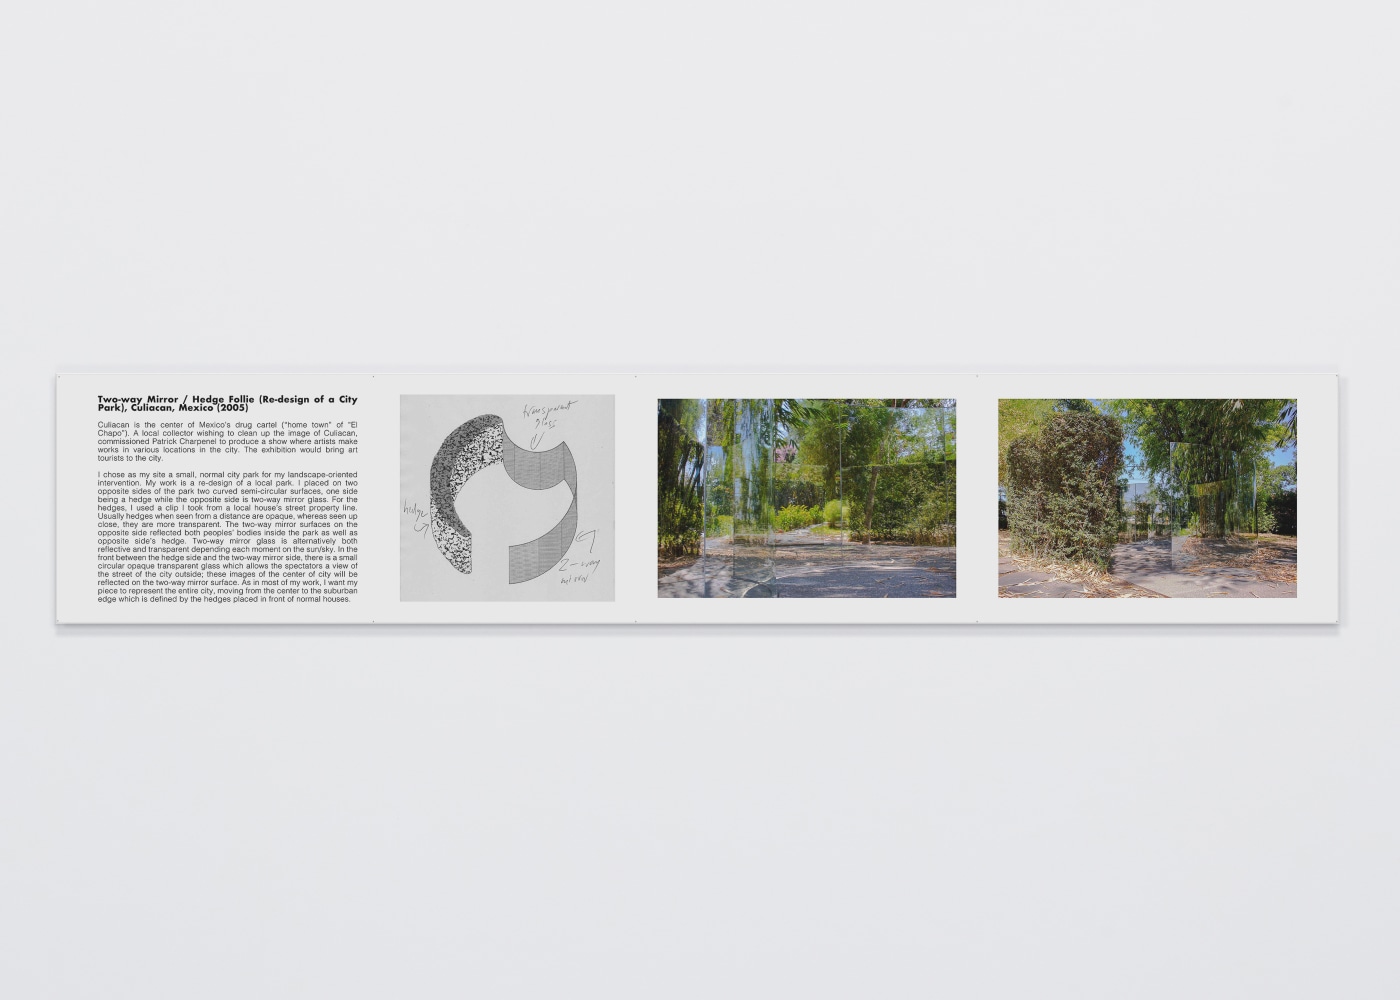 Dan Graham

Two-way Mirror / Hedge Follie (Re-design of a City Park), Culiacan, Mexico

2005 (printed 2021)

Digital inkjet print

15 1/8 x 77 1/2 inches (38.4 x 196.9 cm)

Variation 2 of 5

DG 115

&amp;nbsp;

INQUIRE